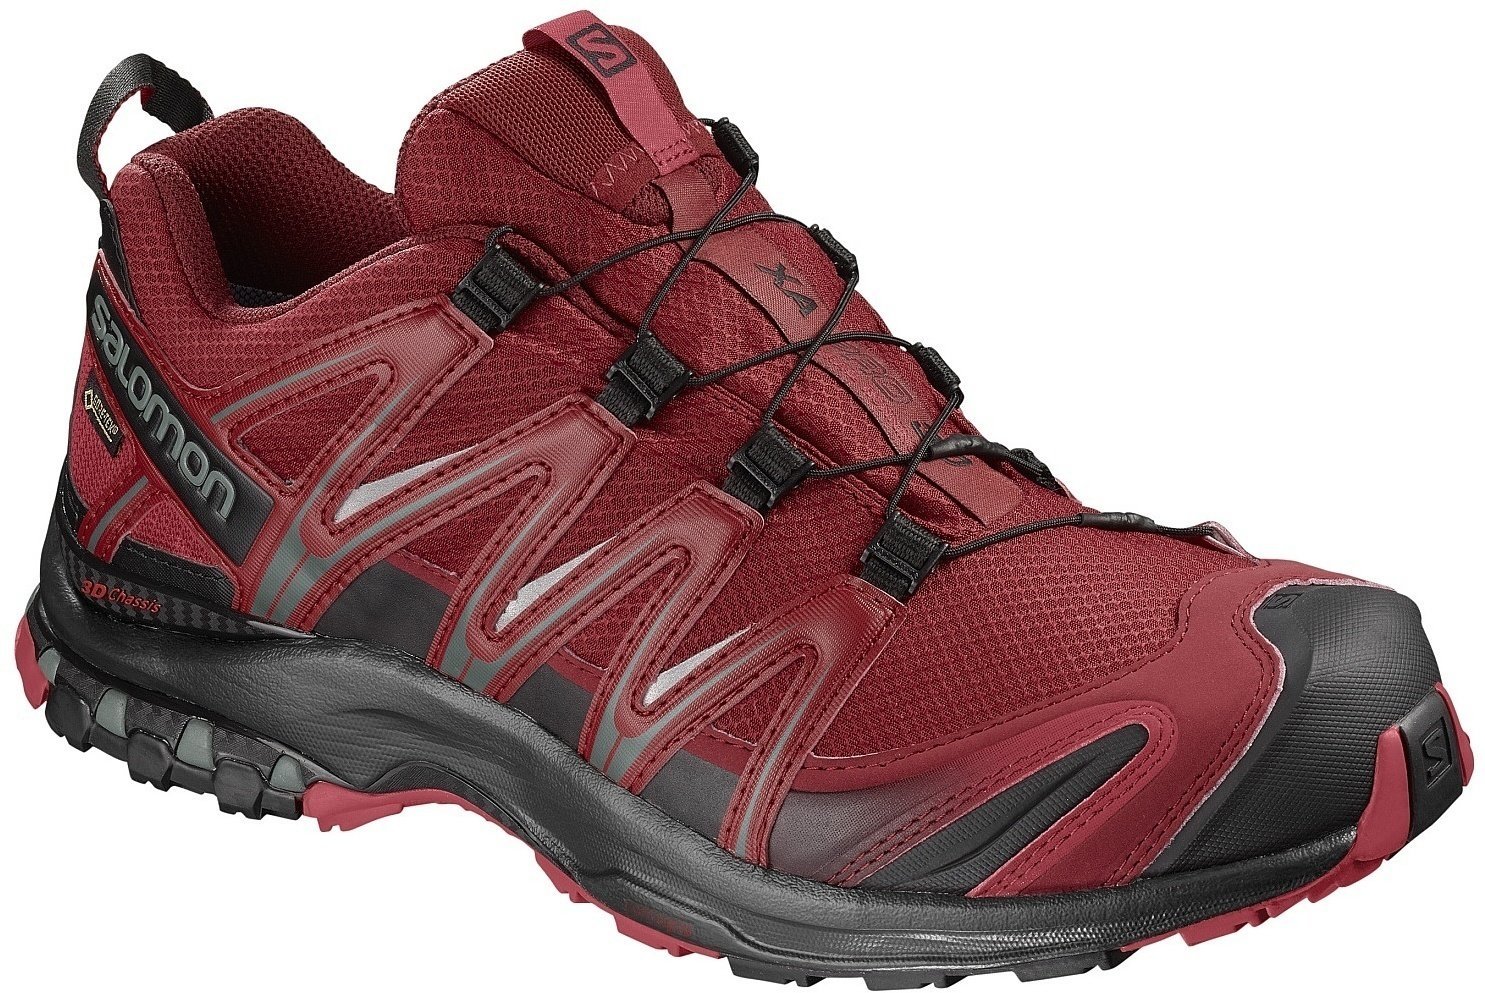 Chaussures outdoor hommes Salomon XA Pro 3D GTX Red Dahlia/Black/Barbados Cherry 44 2/3 Chaussures outdoor hommes